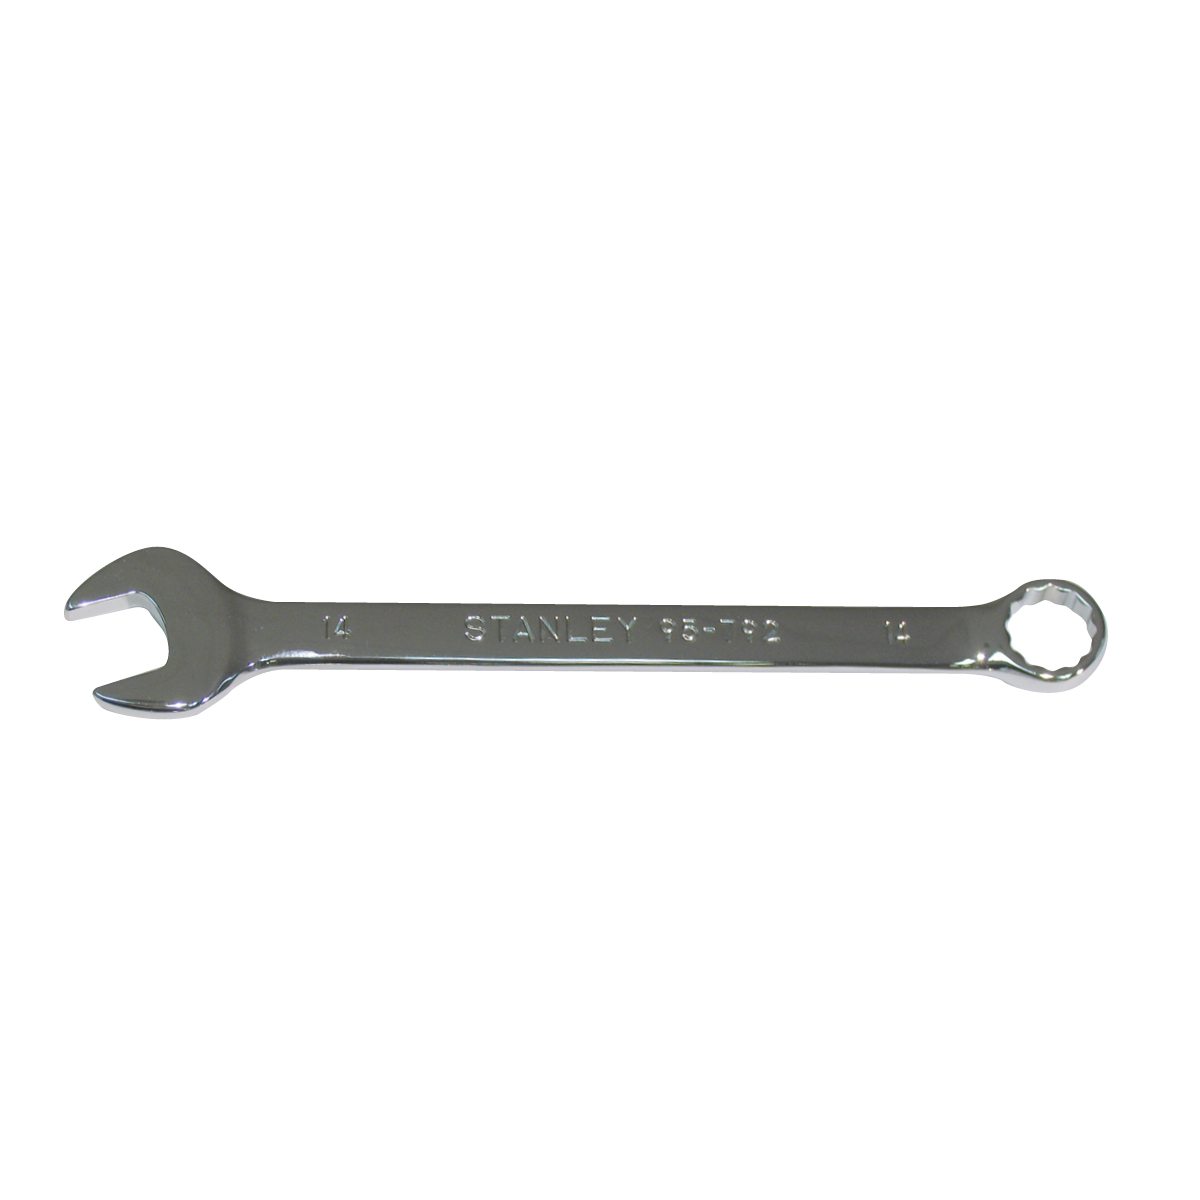 Bgs fbgs30764 combination spanners extra short 14 mm code bgs30764 co